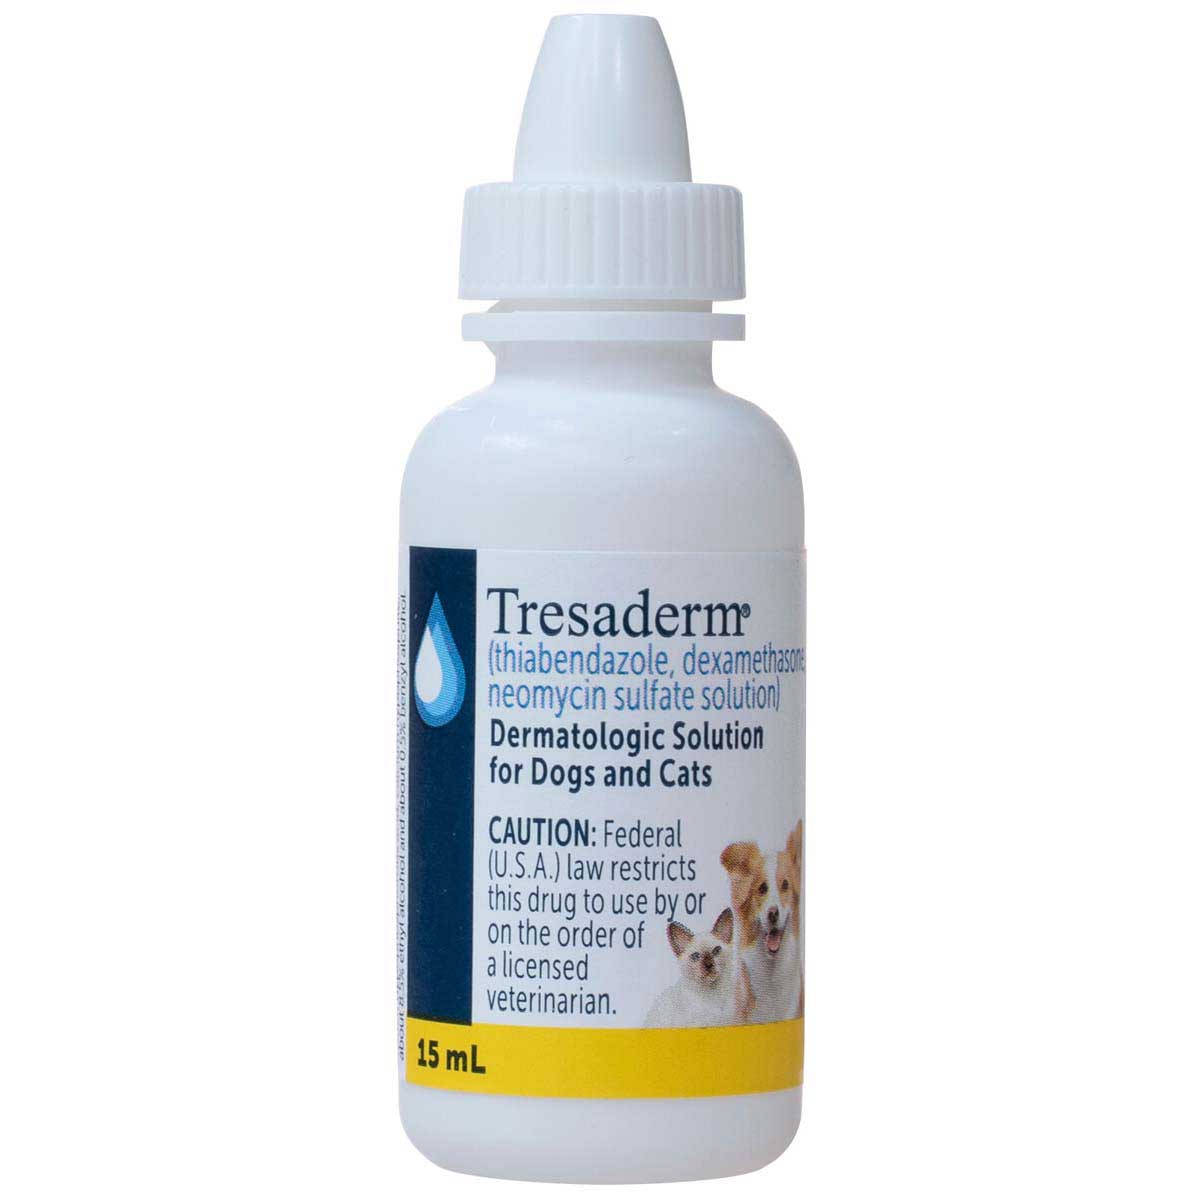 Tresaderm Dermatologic for Dogs Cats Merial Safe.PharmacyTopicals